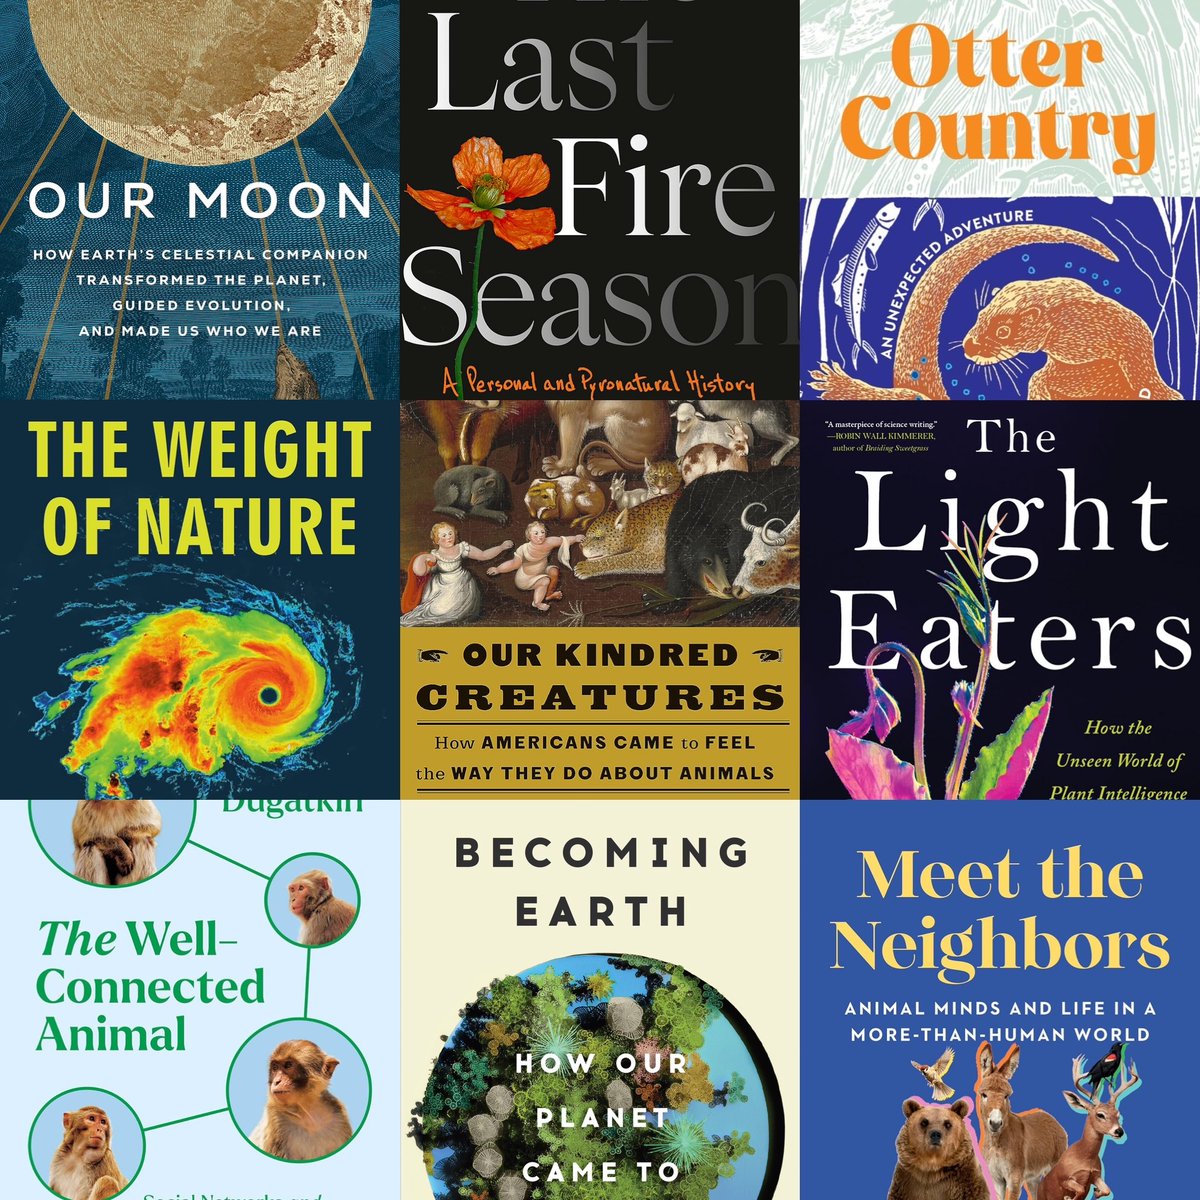 ✨📚BOOKS THREAD📚✨ 🧵This is going to be a really strong year for books about nature and science. So many wonderful titles already out or on the way! Here's a thread looking at a few of the books debuting between January and July that have caught my eye, in chronological order